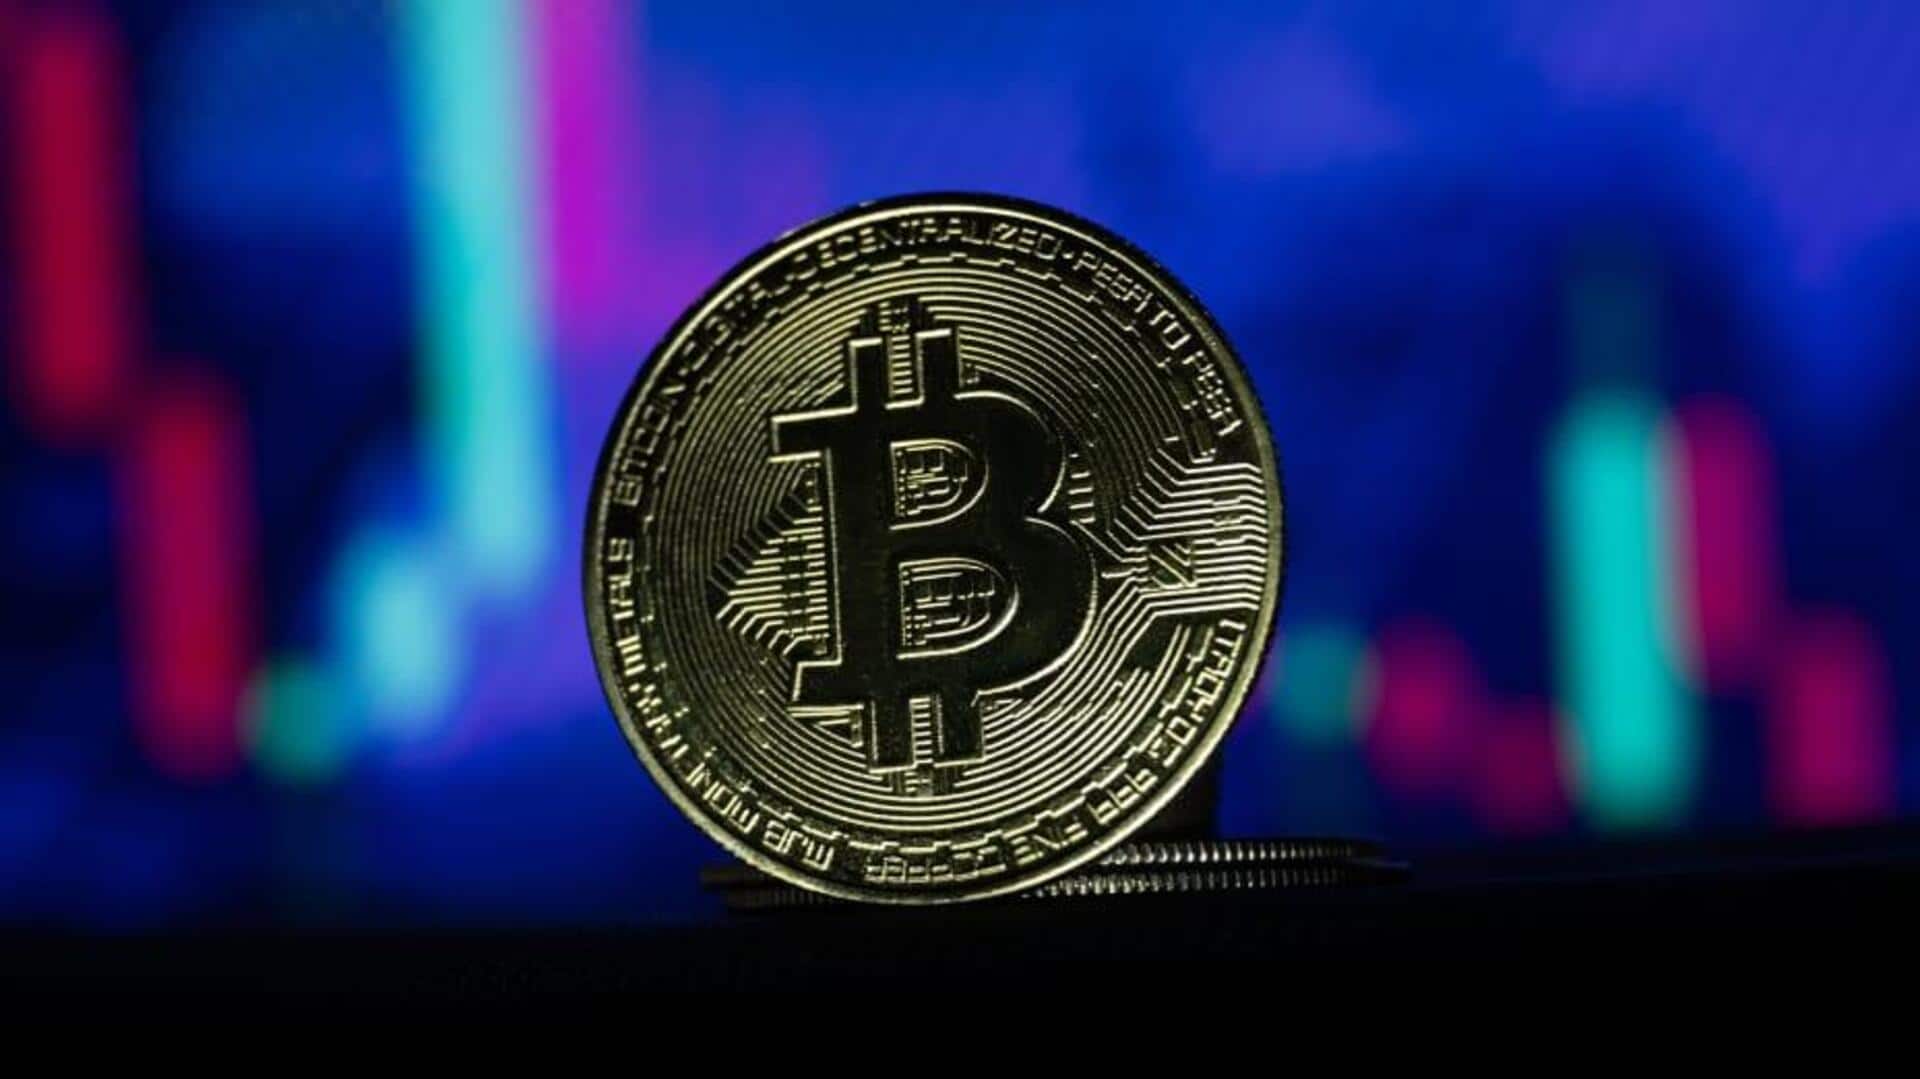 Cryptocurrency prices: Here are rates of Bitcoin, Ethereum, Tether, Dogecoin